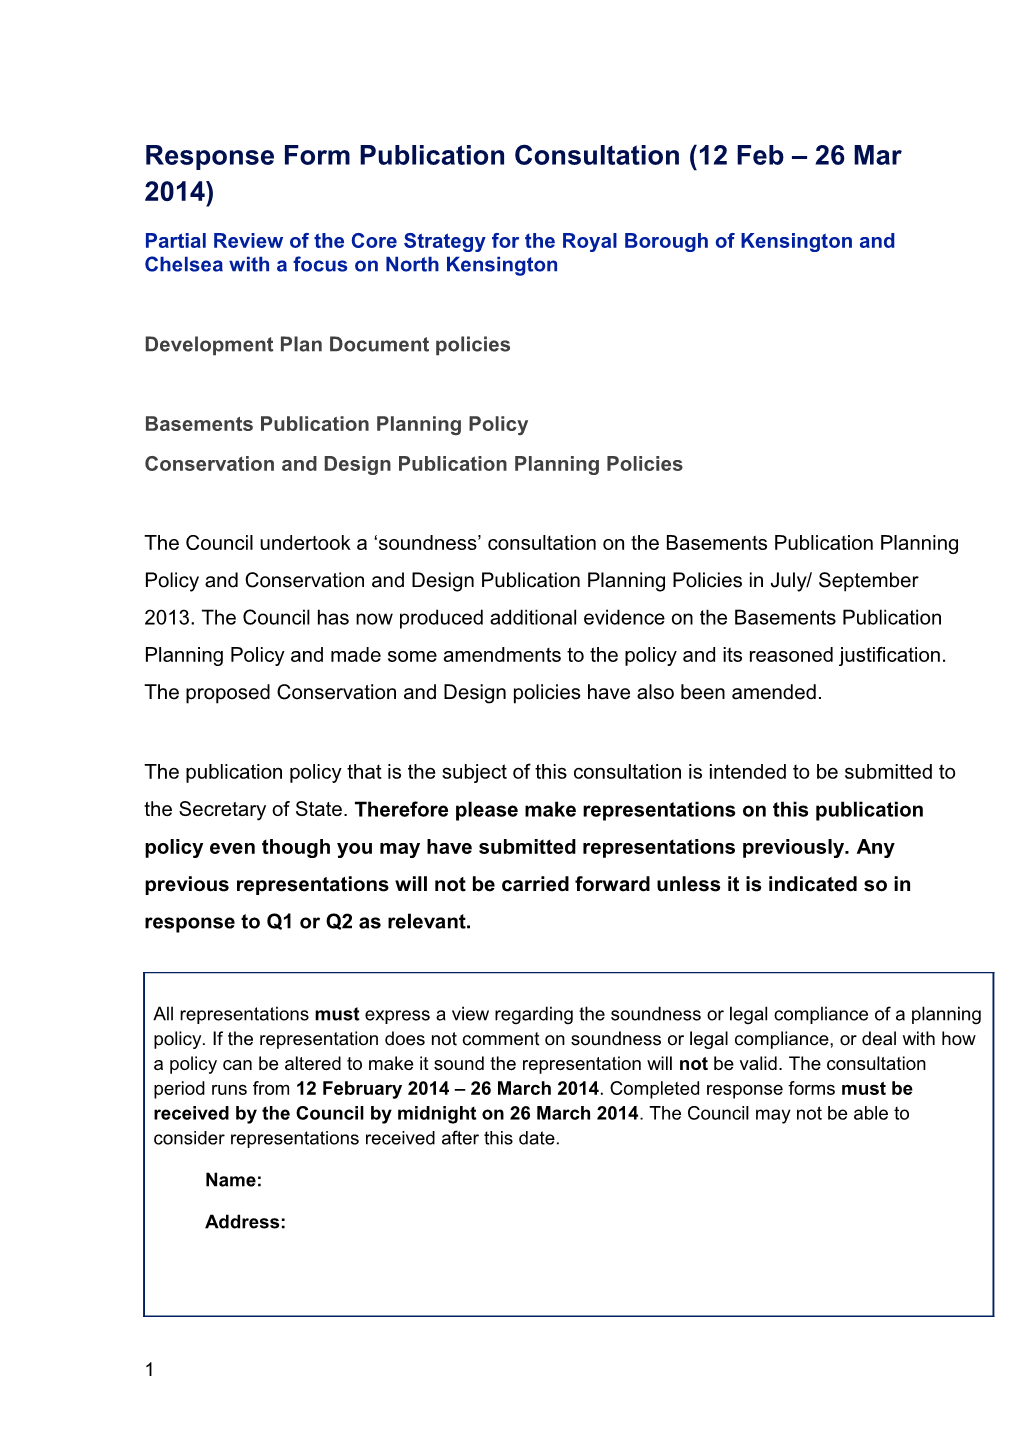 Partial Review of the Core Strategyfor Theroyalborough Ofkensington and Chelseawith A